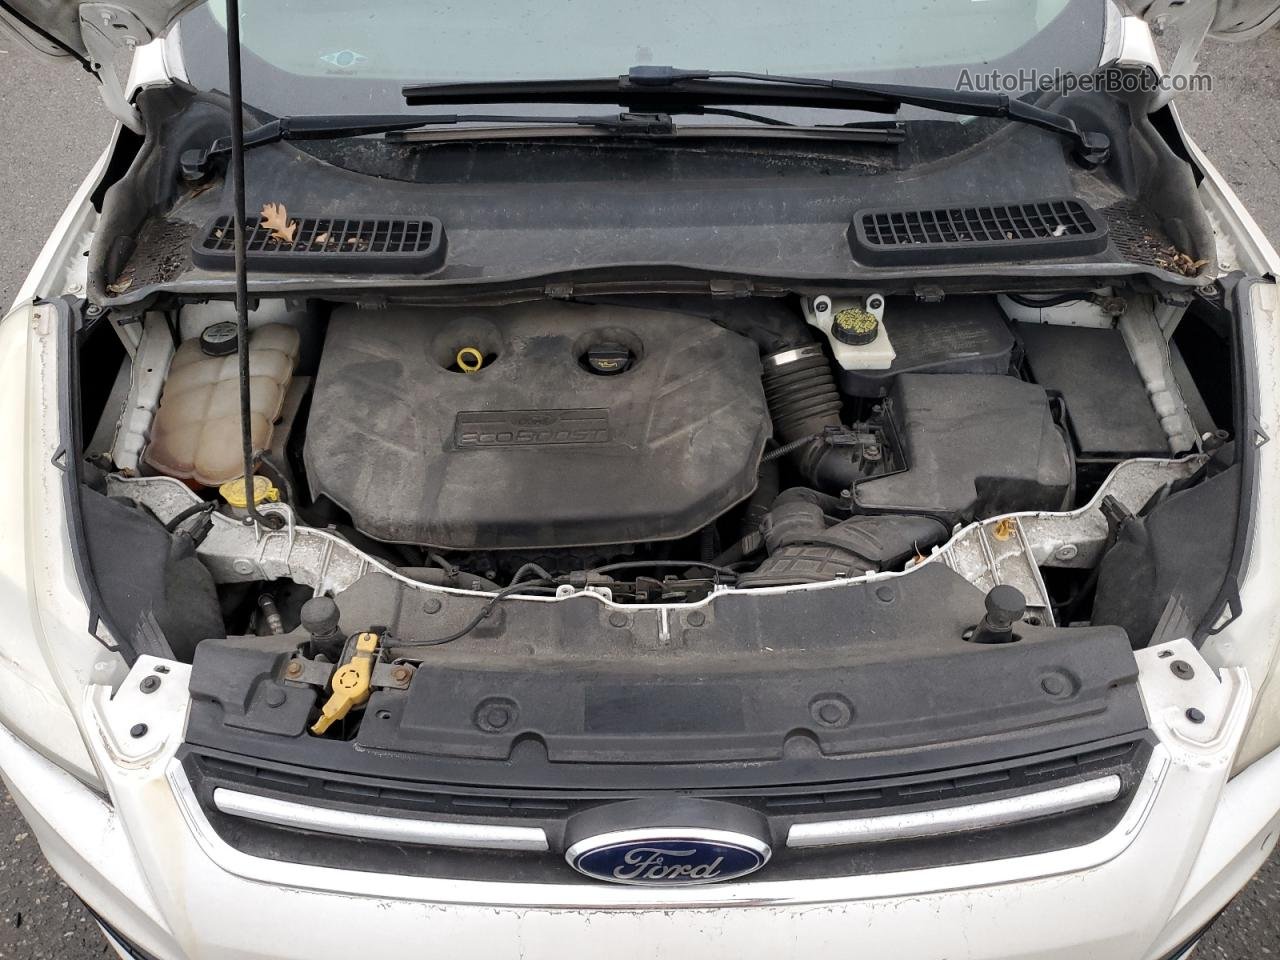 2013 Ford Escape Sel Белый vin: 1FMCU9H92DUC58247